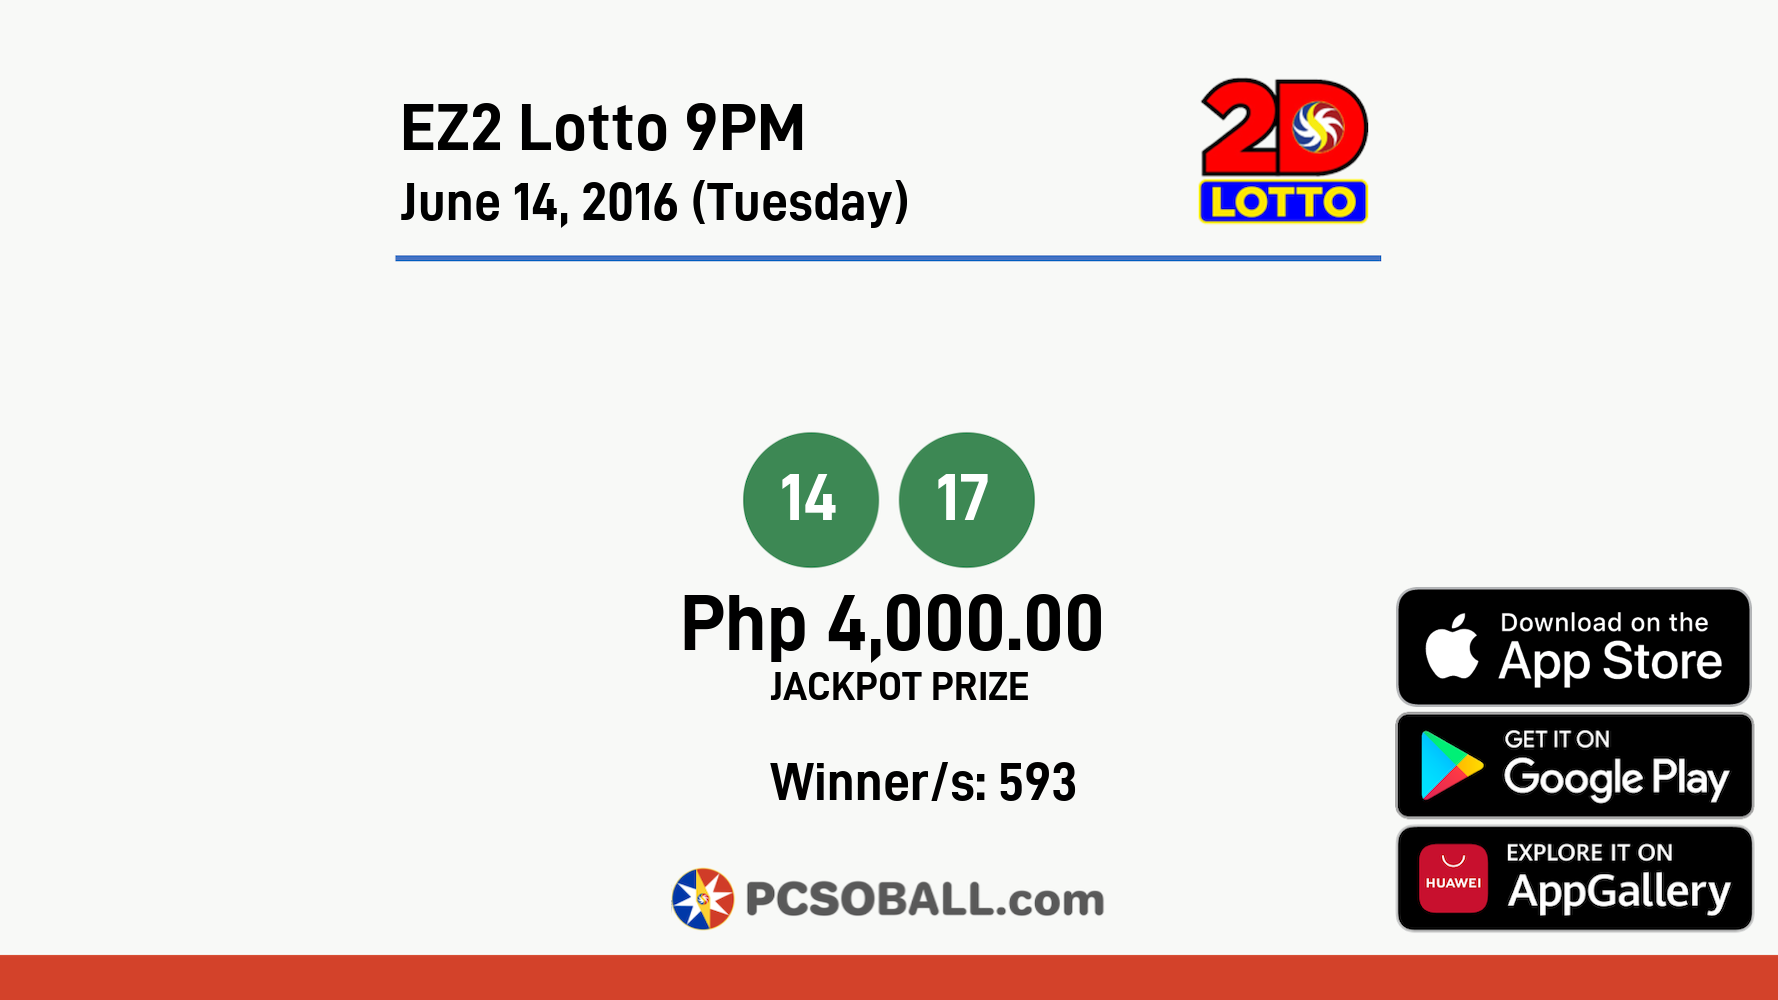 EZ2 Lotto 9PM June 14, 2016 (Tuesday) Result